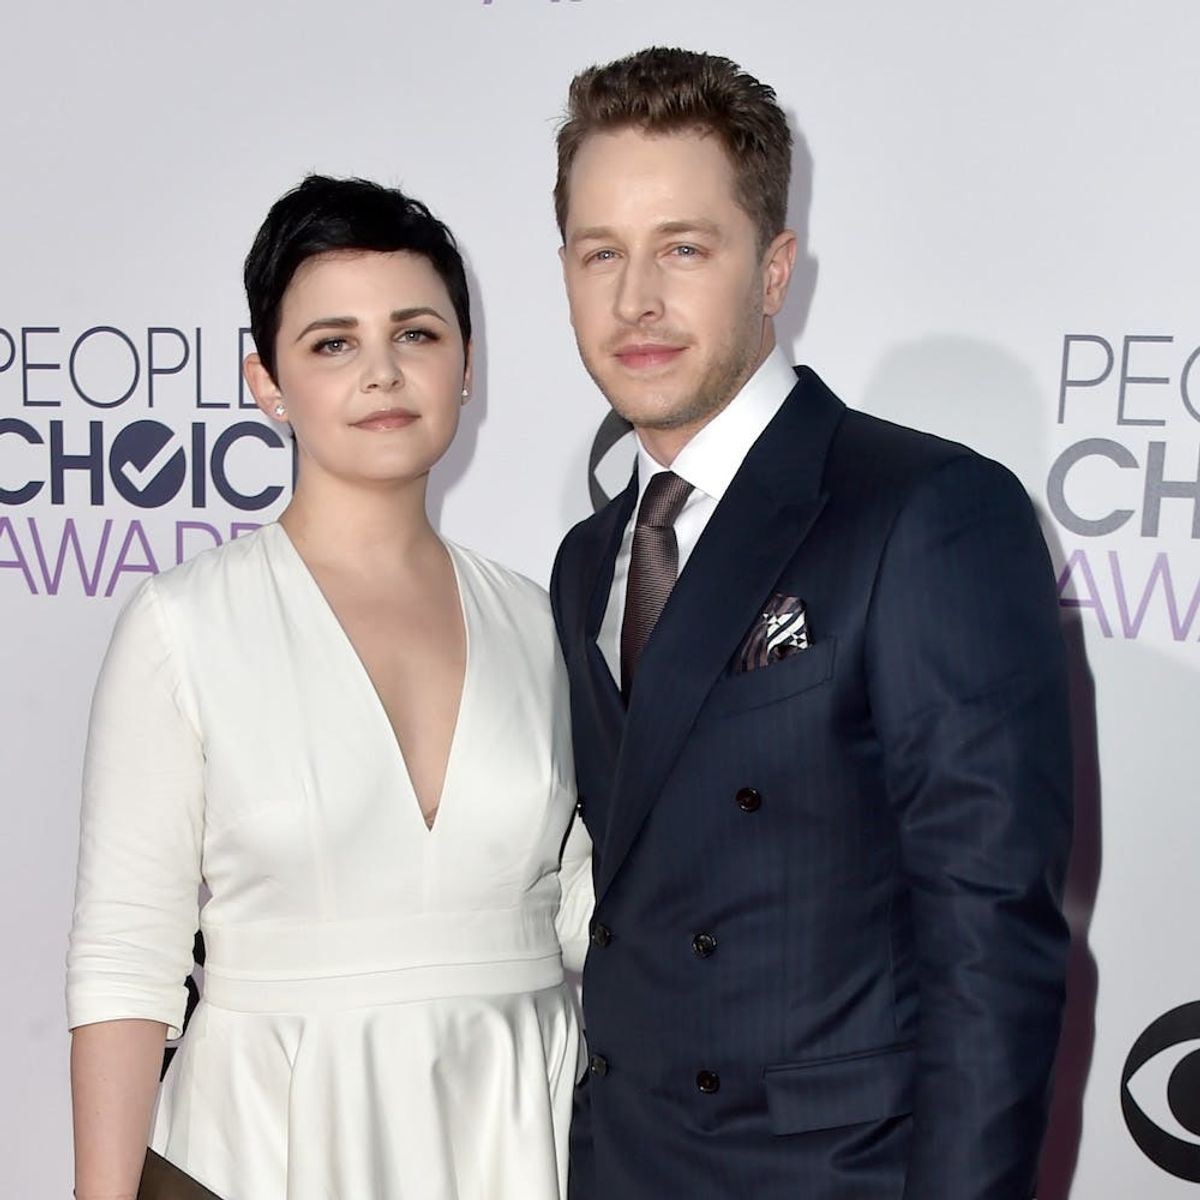 Once Upon a Time’s Ginnifer Goodwin + Josh Dallas Just Had Another Baby!